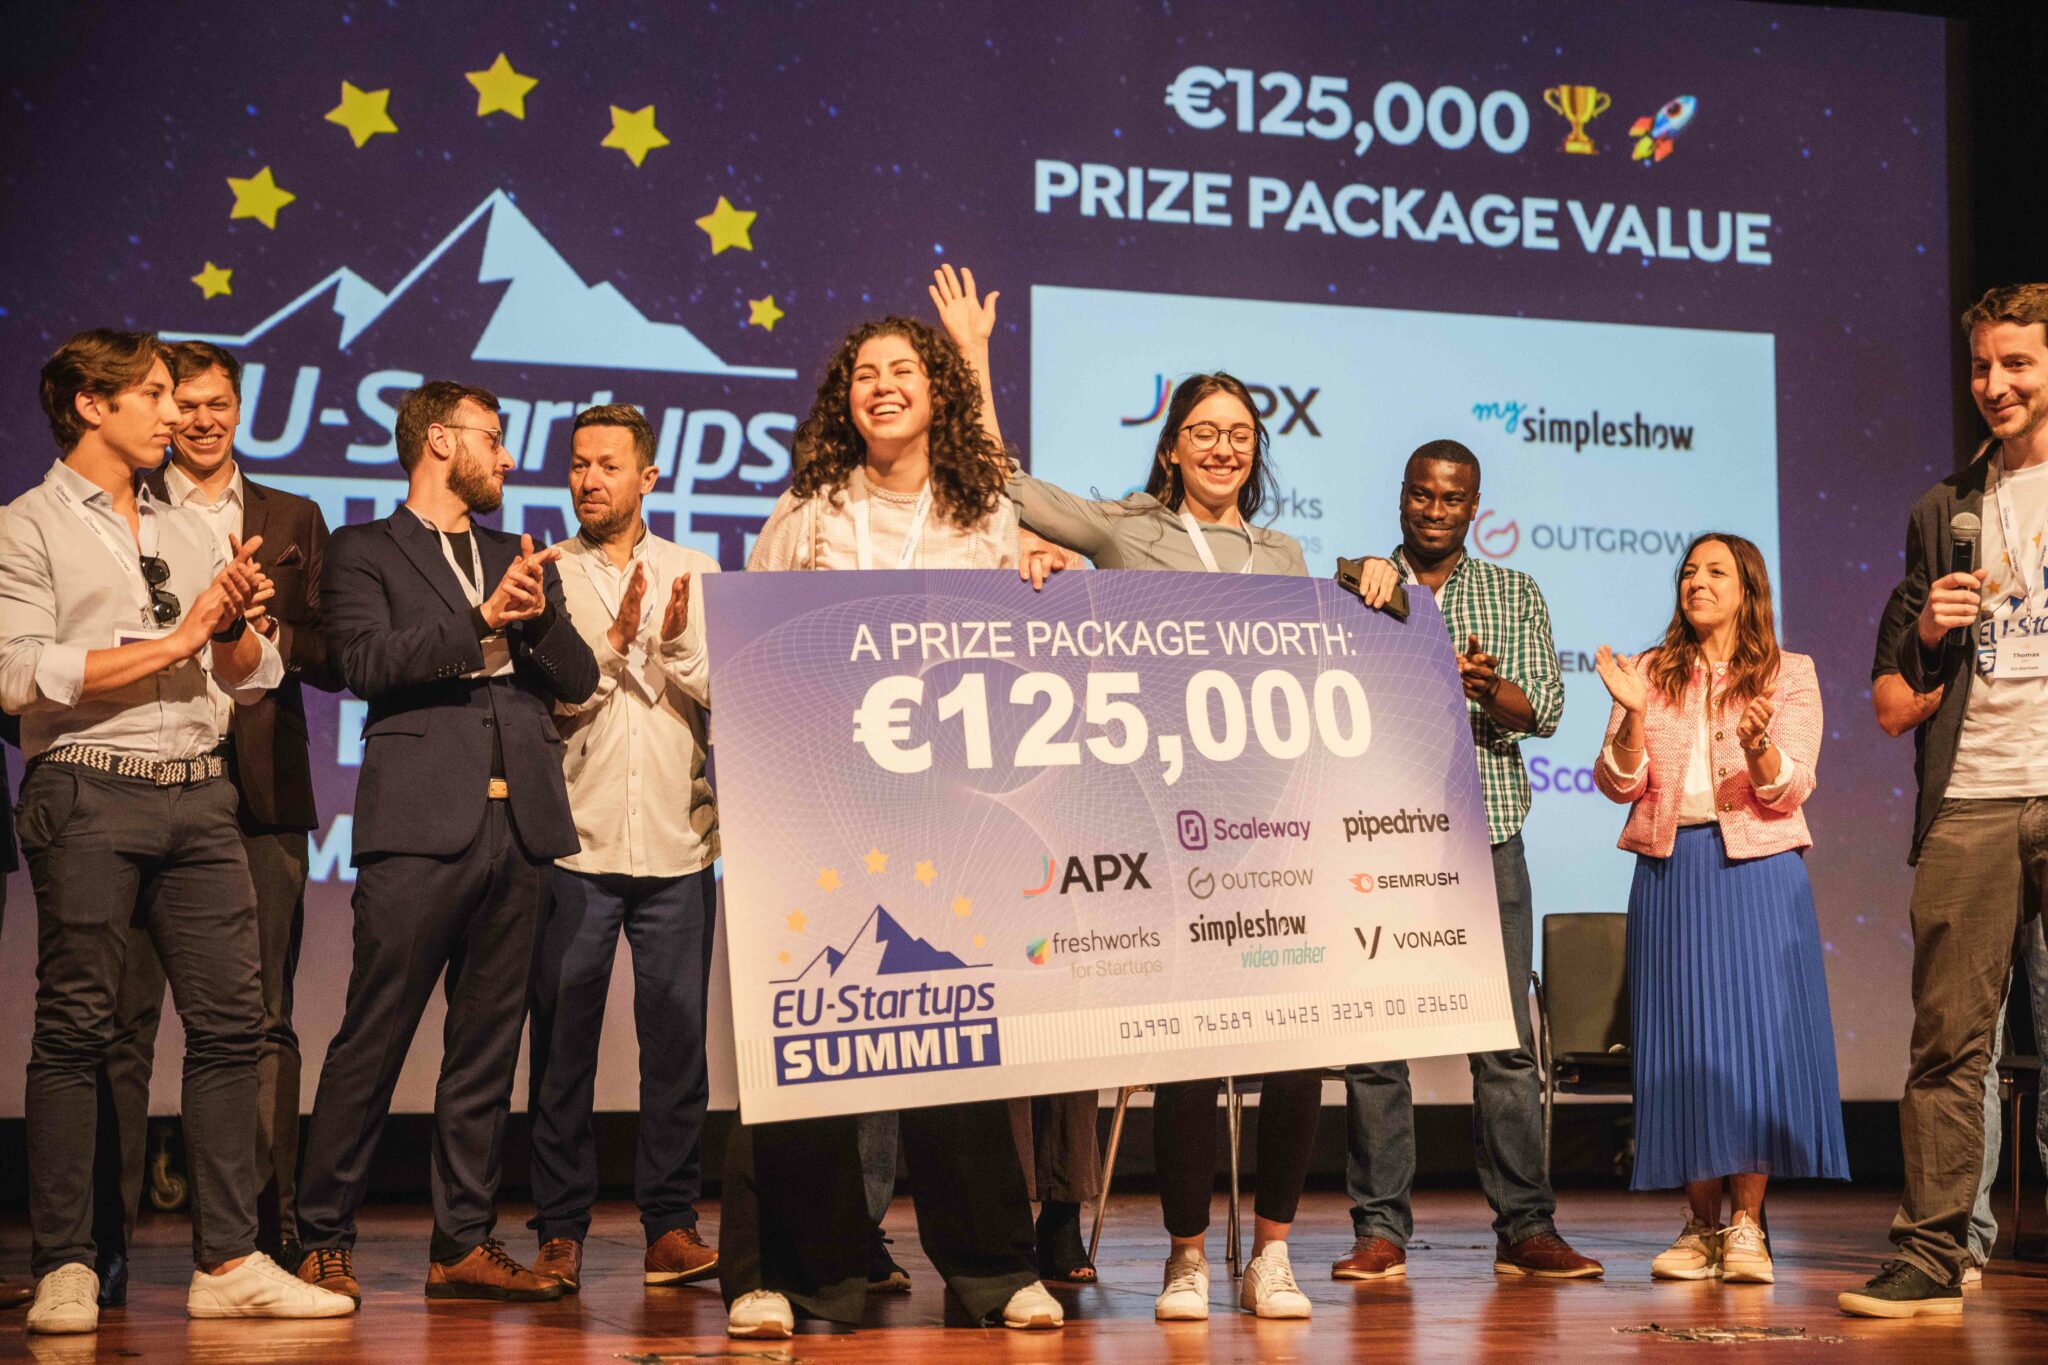 Introducing GreenBytes: The winner of the EU-Startups Summit 2022 Pitch Competition!